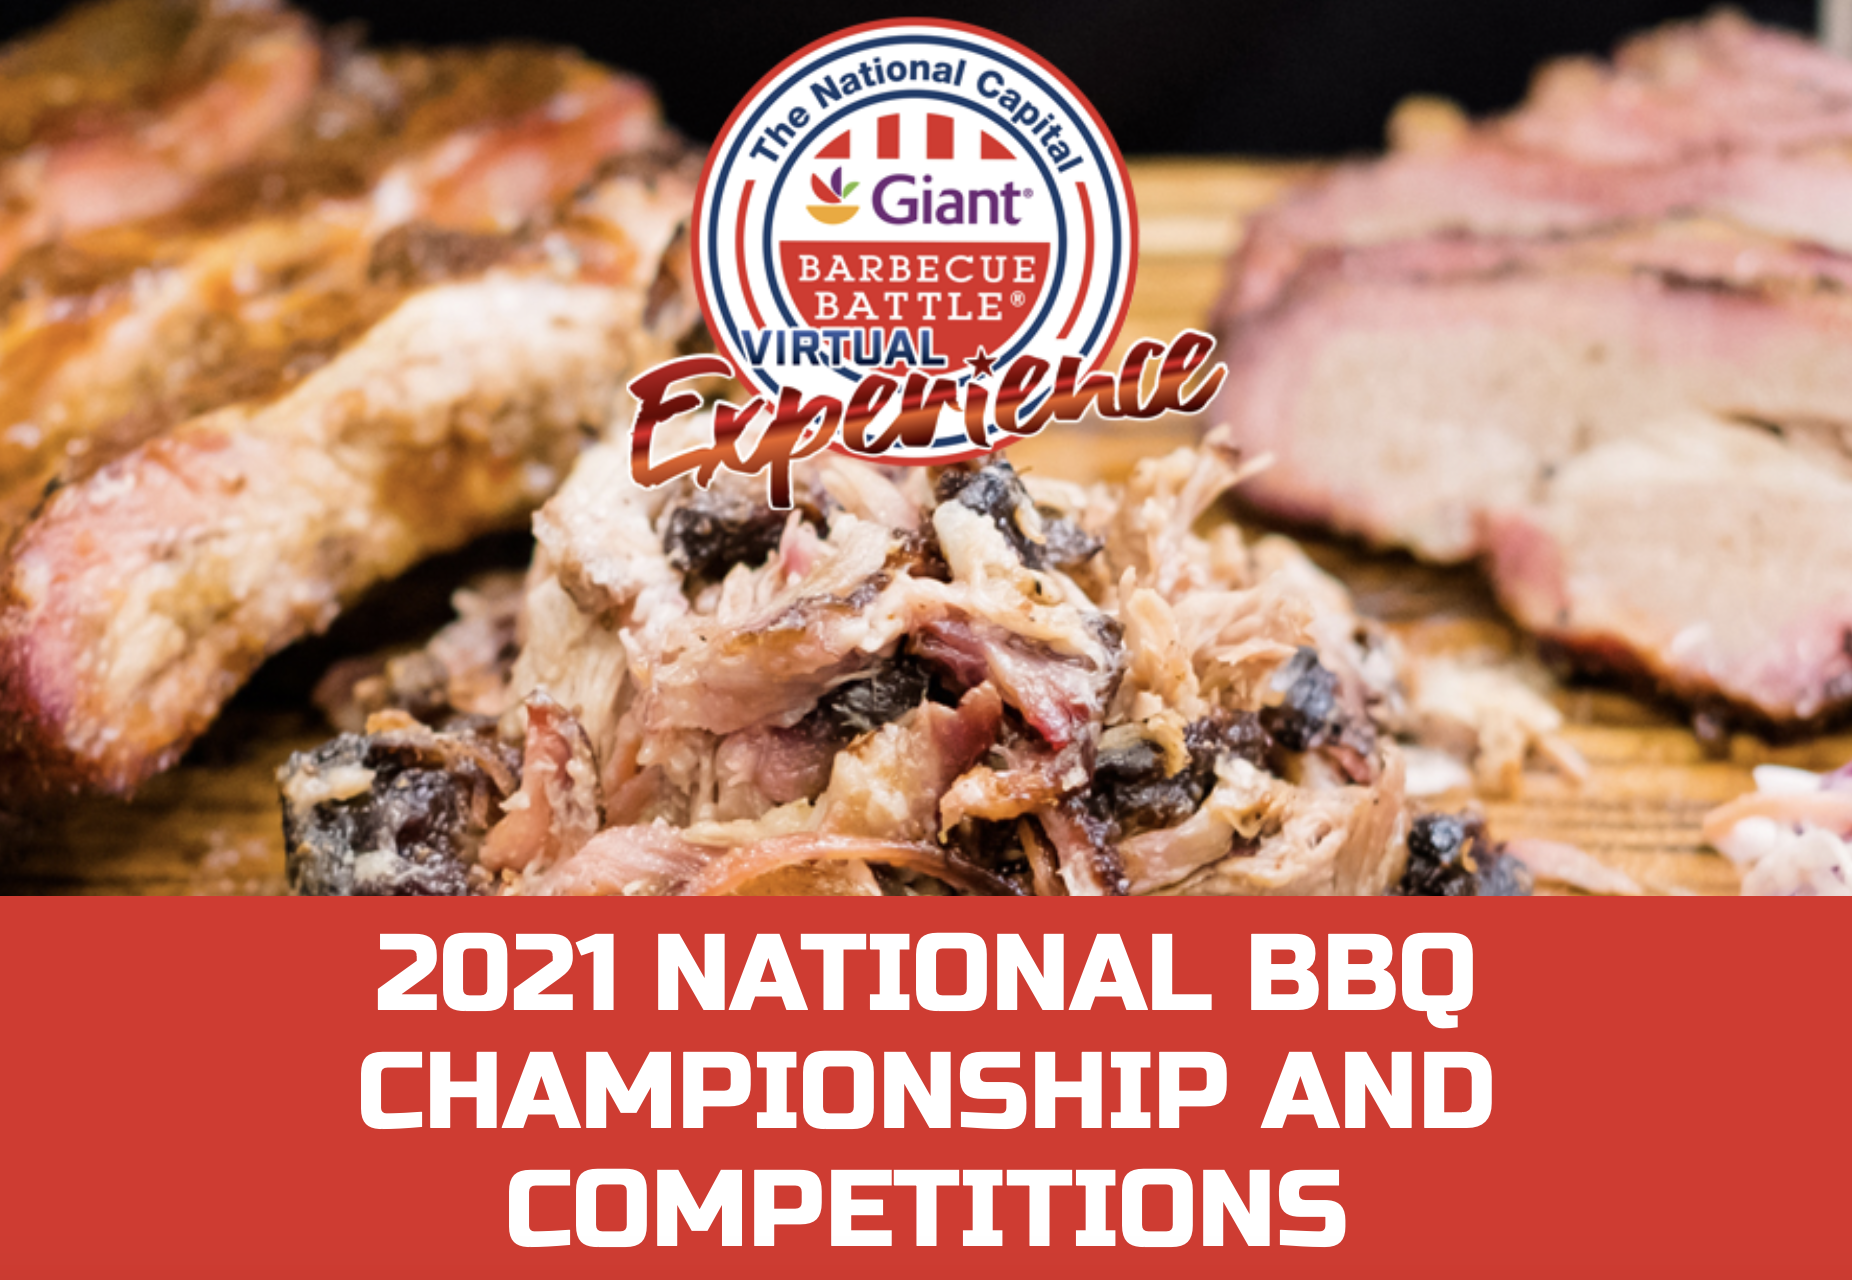 2021 National BBQ Championship + Competitions through 6.26